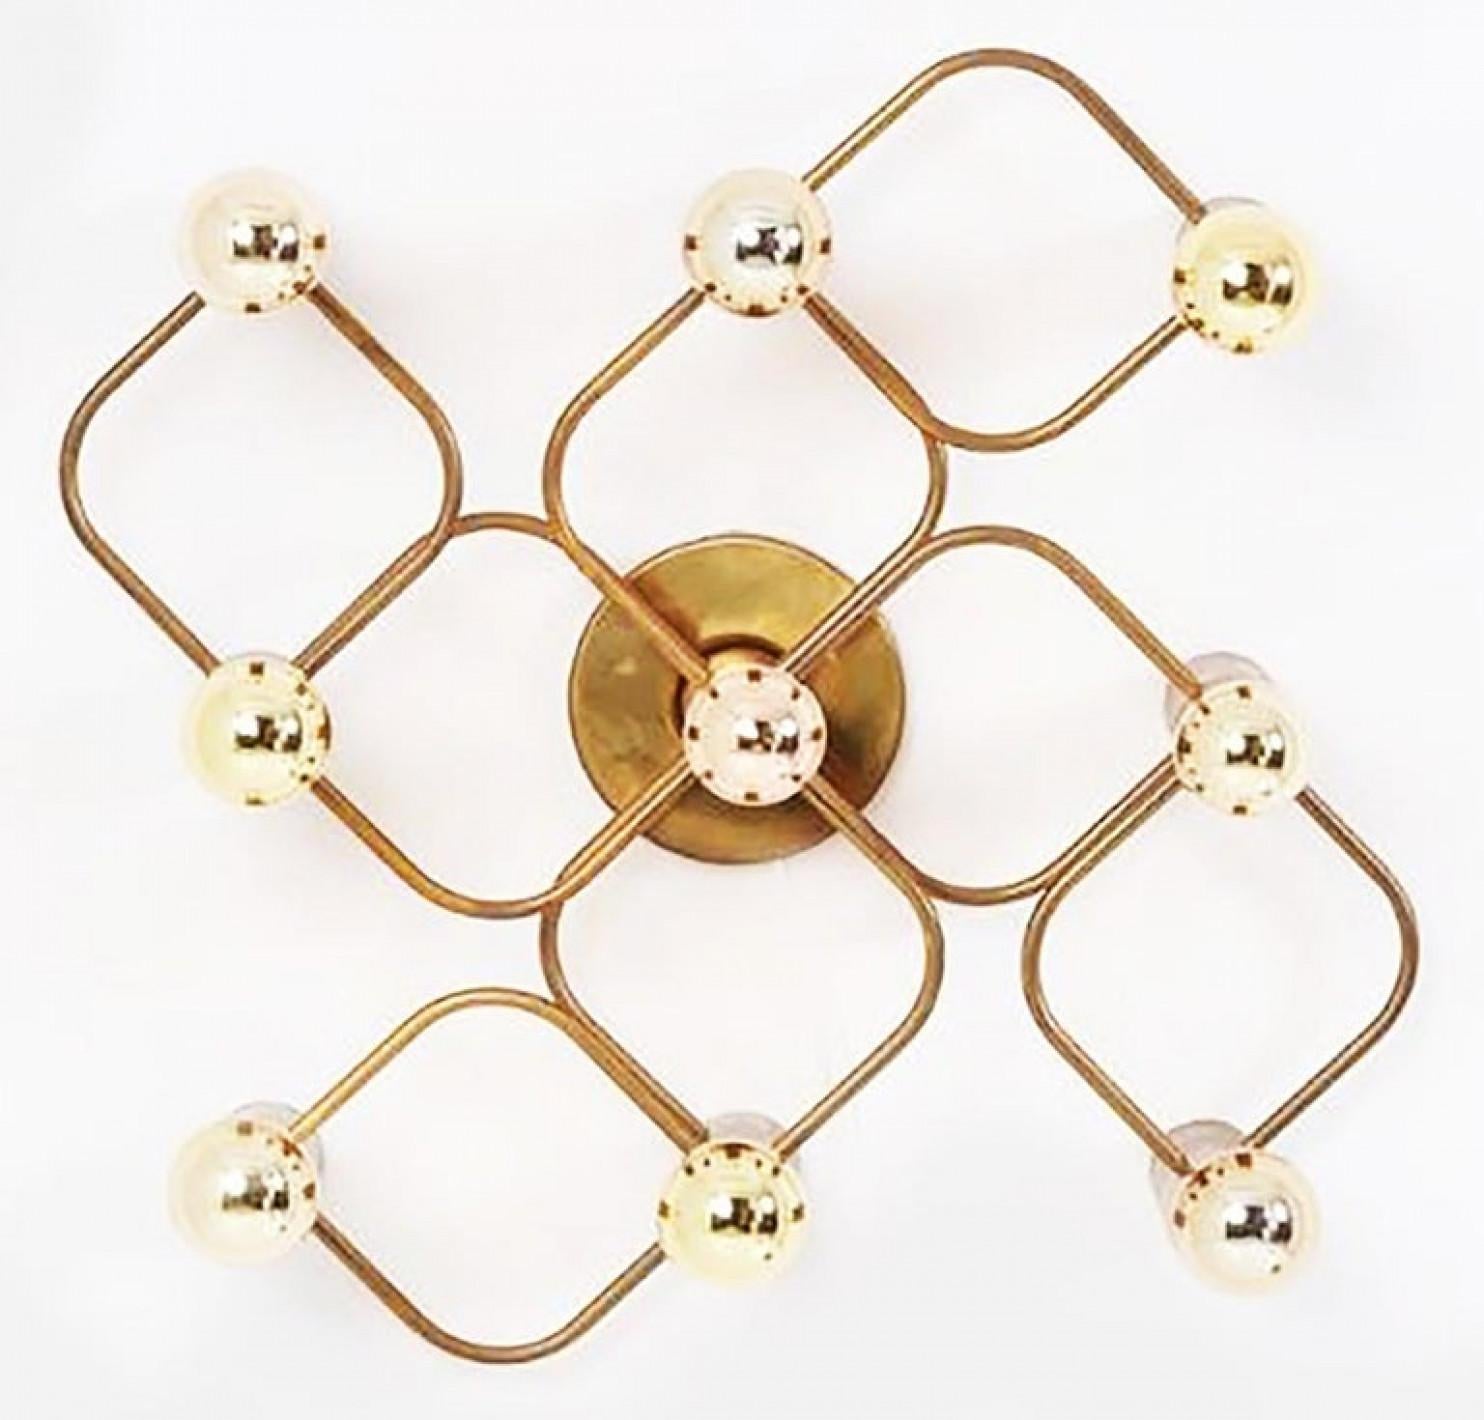 Gorgeous Sciolari style ceiling or wall flush mount by Leola. Made with solid polished brass, Germany, 1970s.

Can be used as ceiling flush mount or as an extra ordinary wall light. 2 pieces available

The light fixture requires 9 E14 candelabra